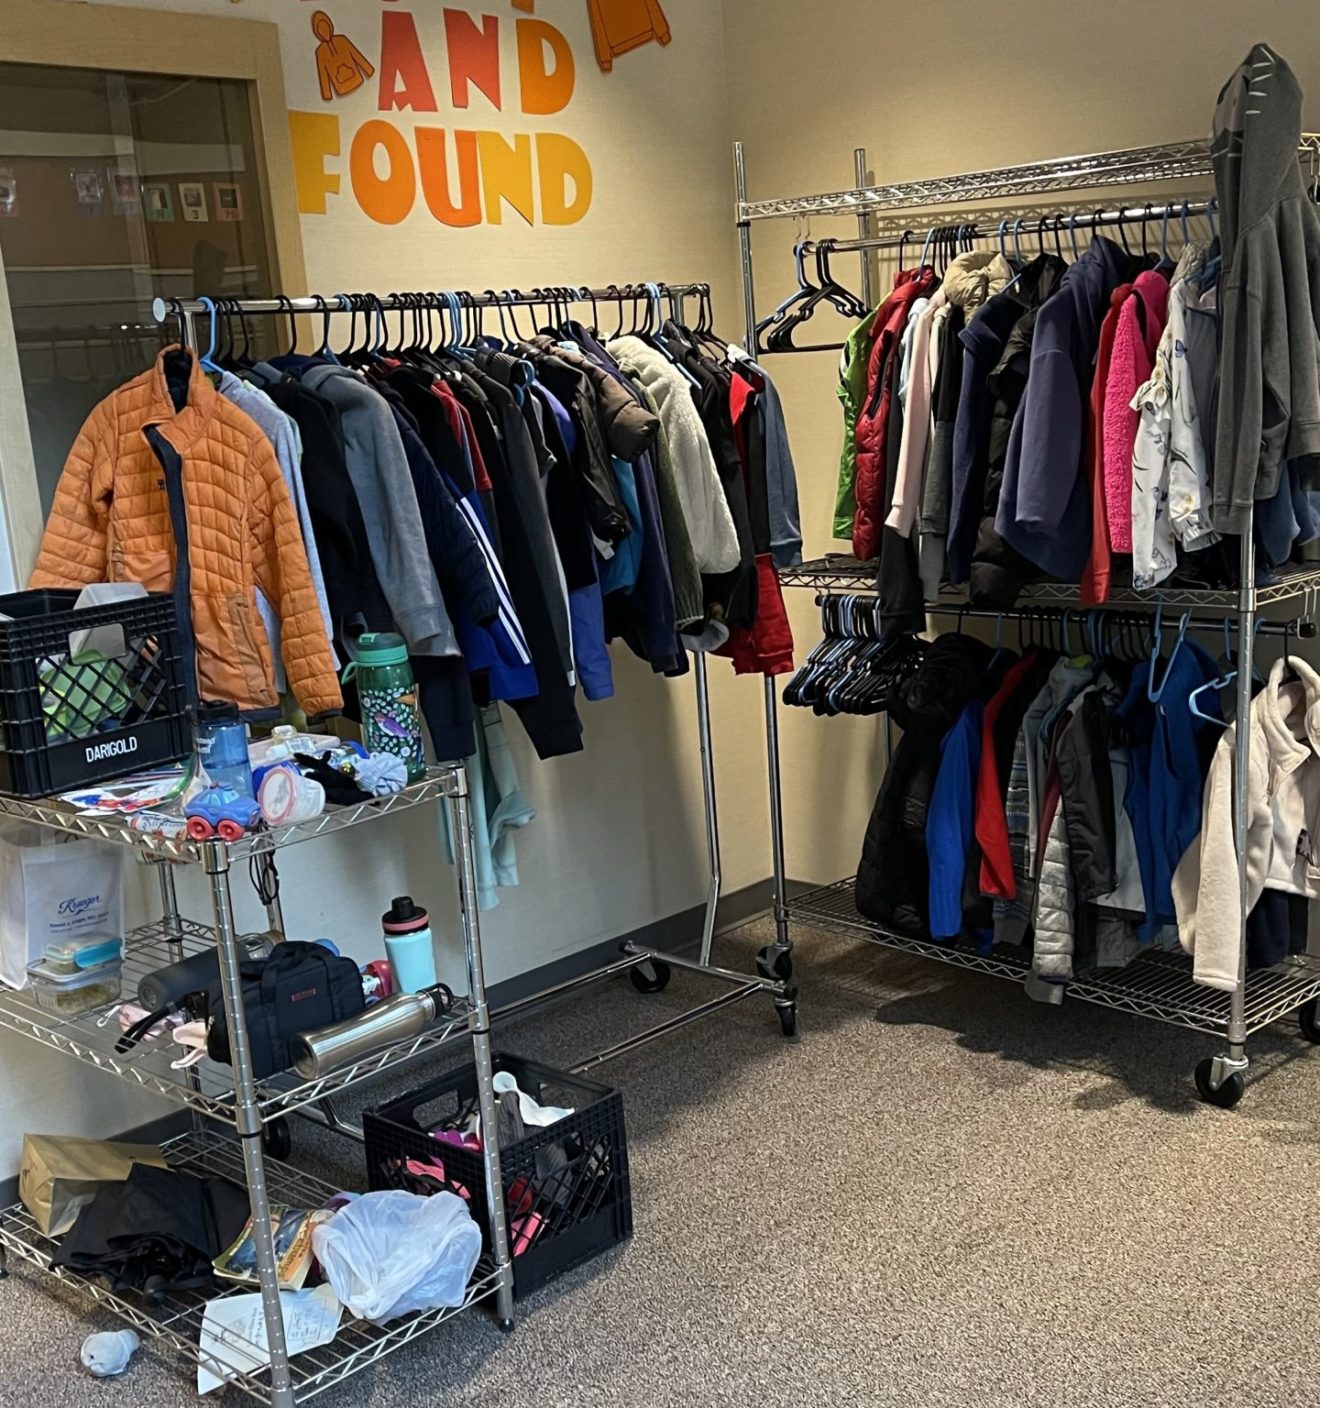 Lost and Found Is Overflowing!